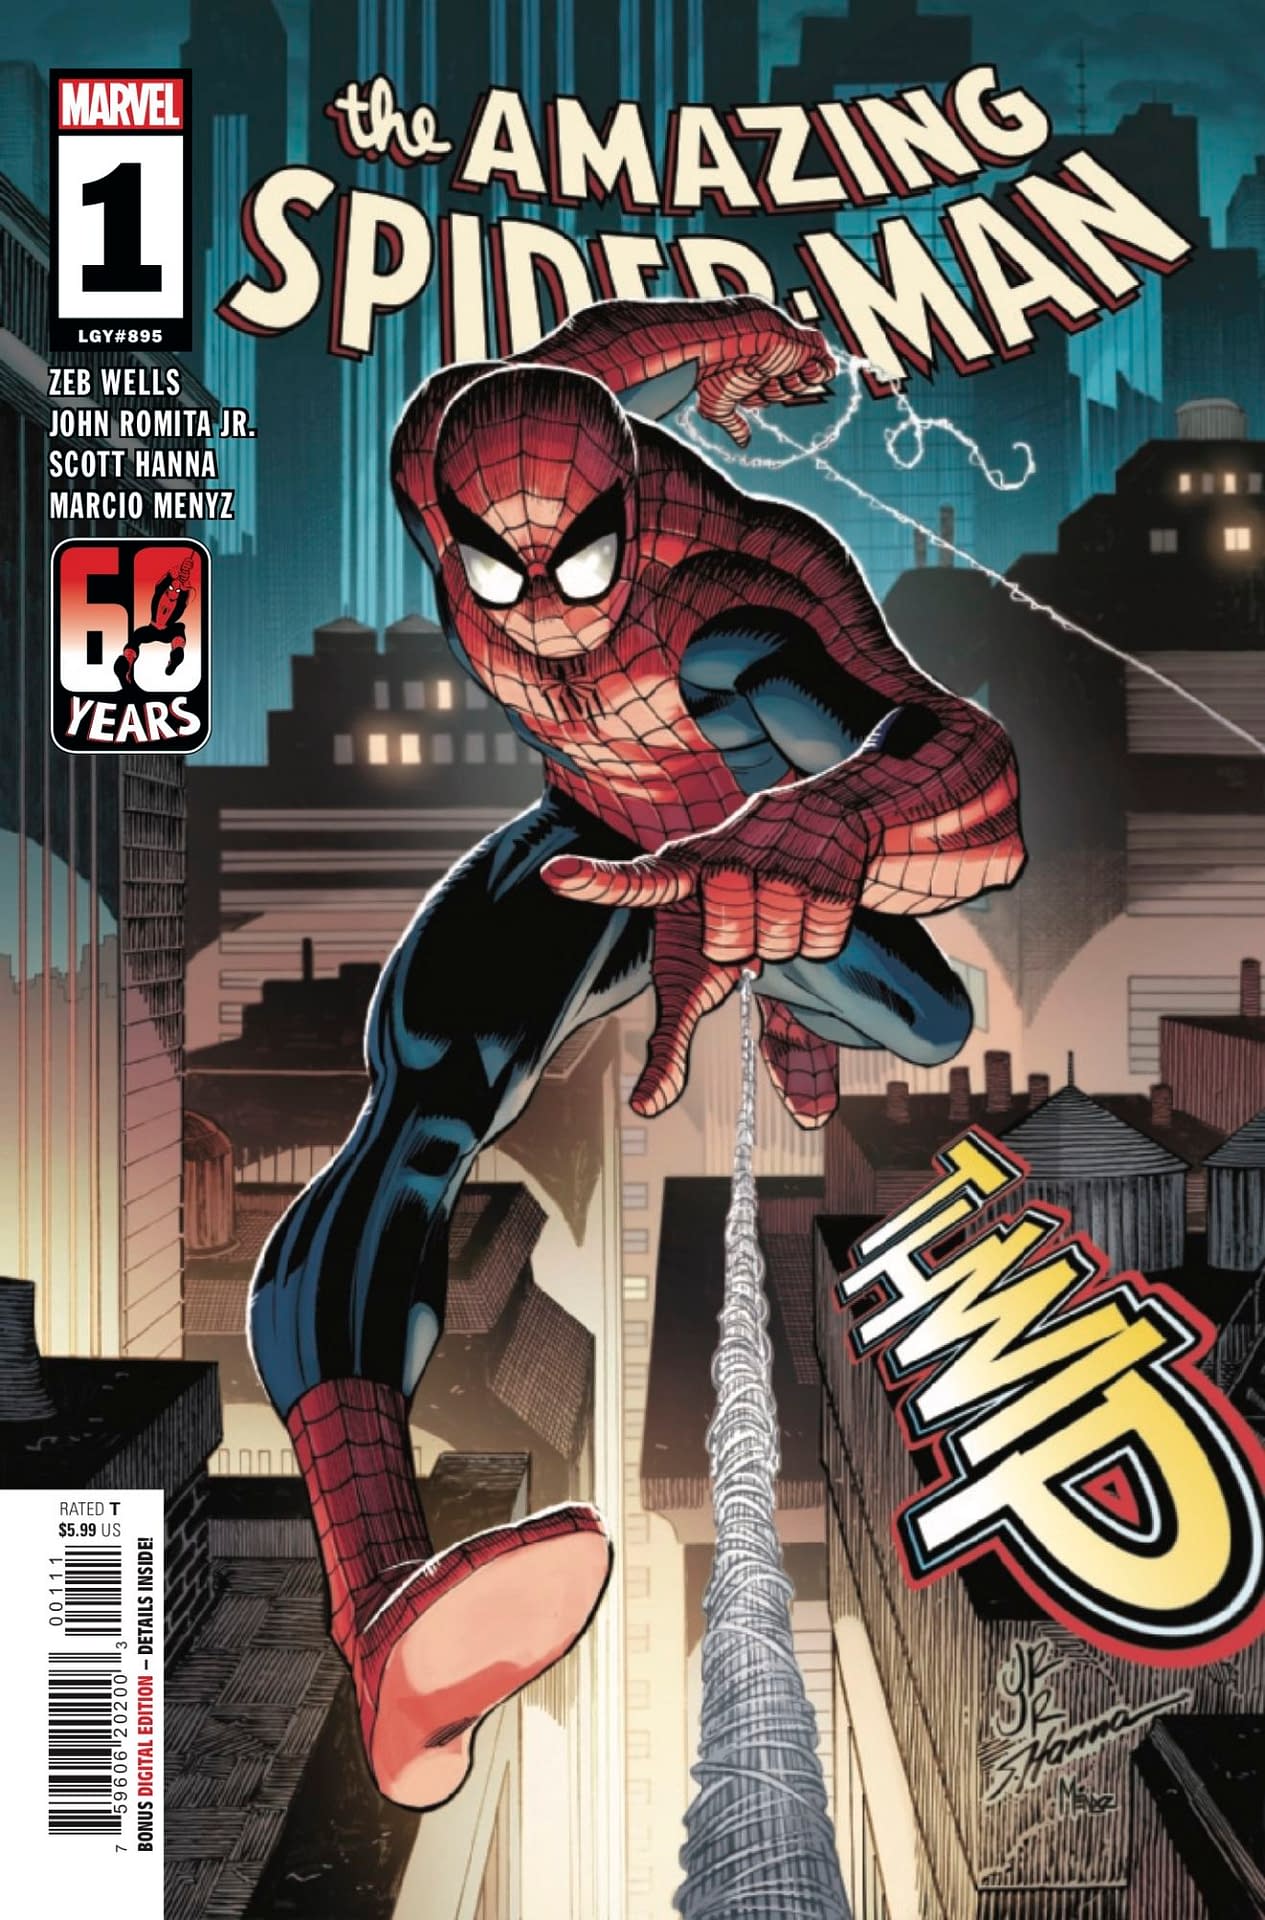 Amazing Spider-Man #1 Review: Back To Basics Still Works